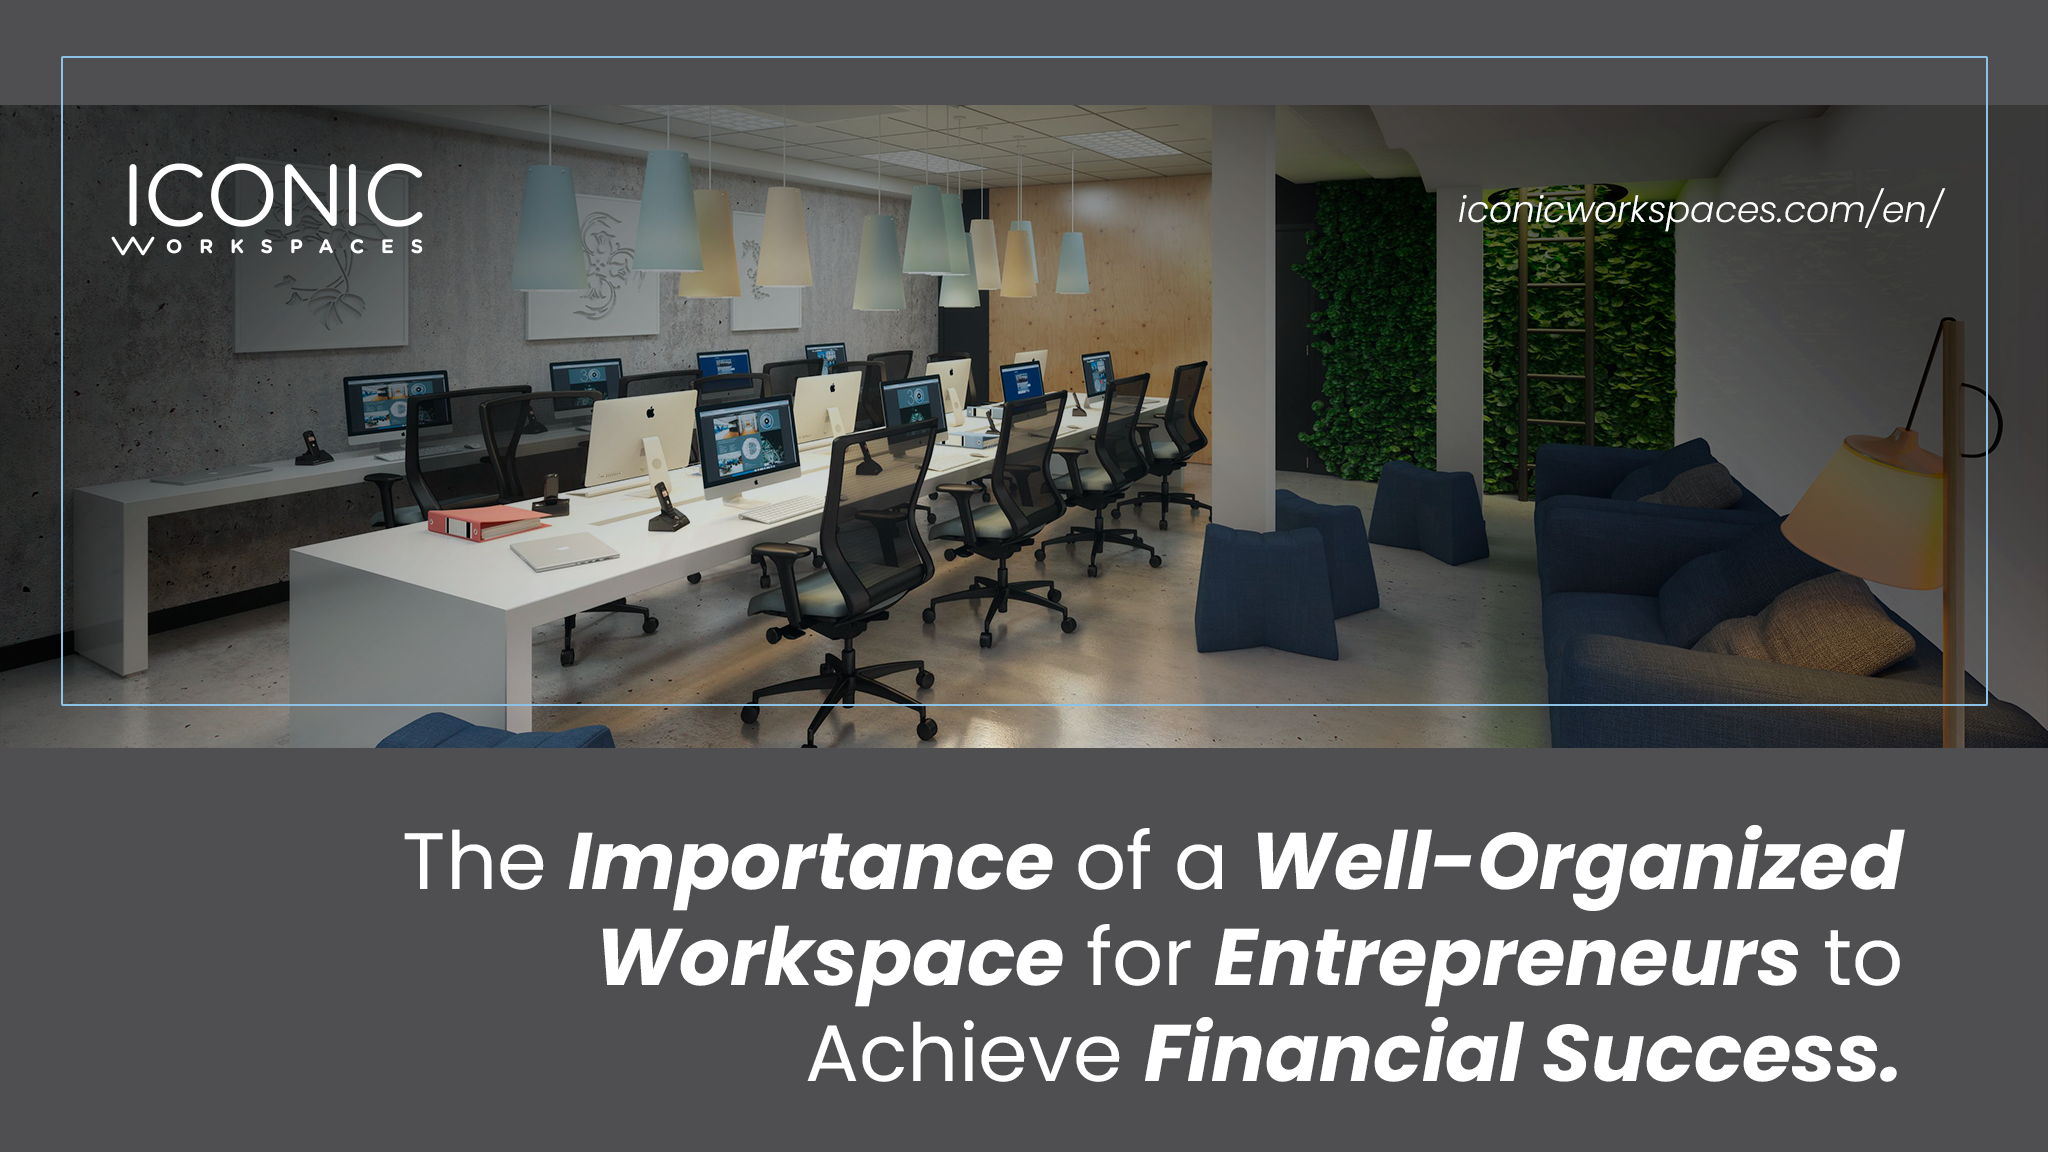 The Missing Link to Achieving Financial Freedom: Why a Well-Organized Workspace Matters for Entrepreneurs